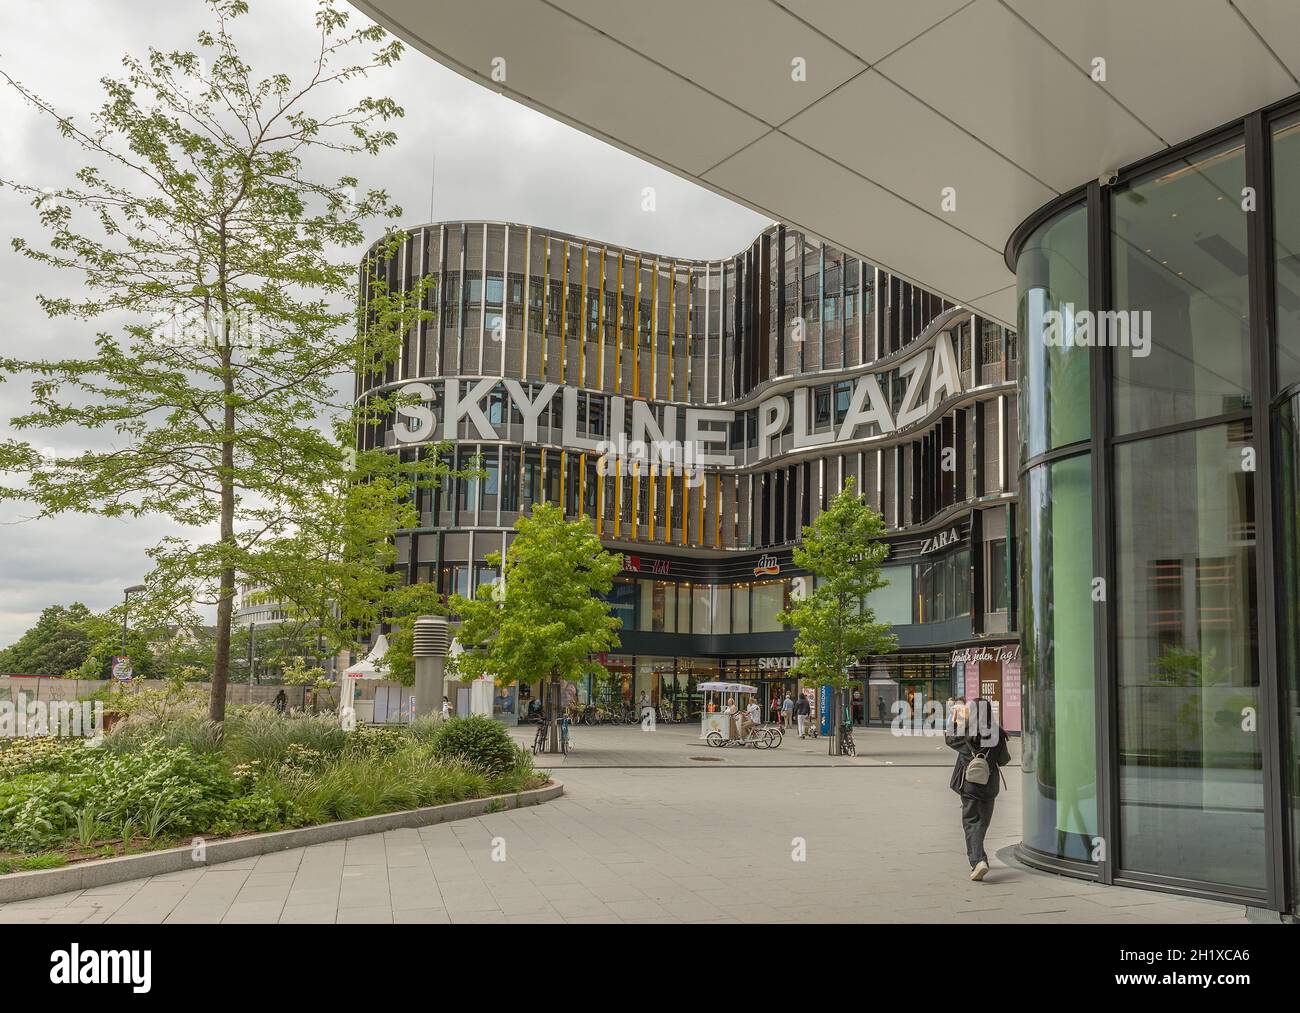 the facade with lettering of the Skyline Plaza in the Europaviertel,  Frankfurt, Germany Stock Photo - Alamy